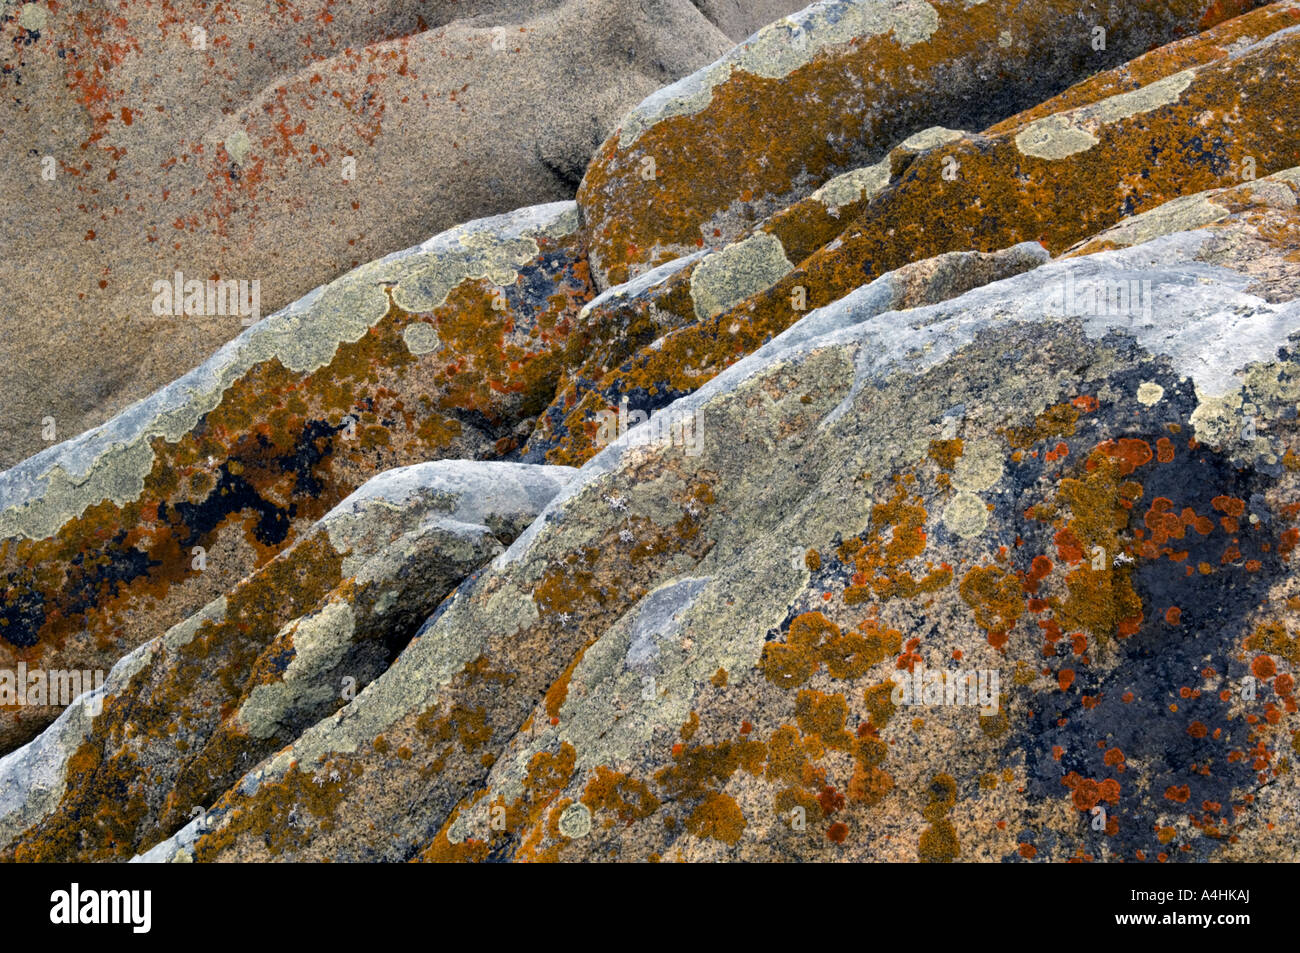 algae growing on a boulder Cape Columbine Nature Reserve Paternoster South Africa Stock Photo